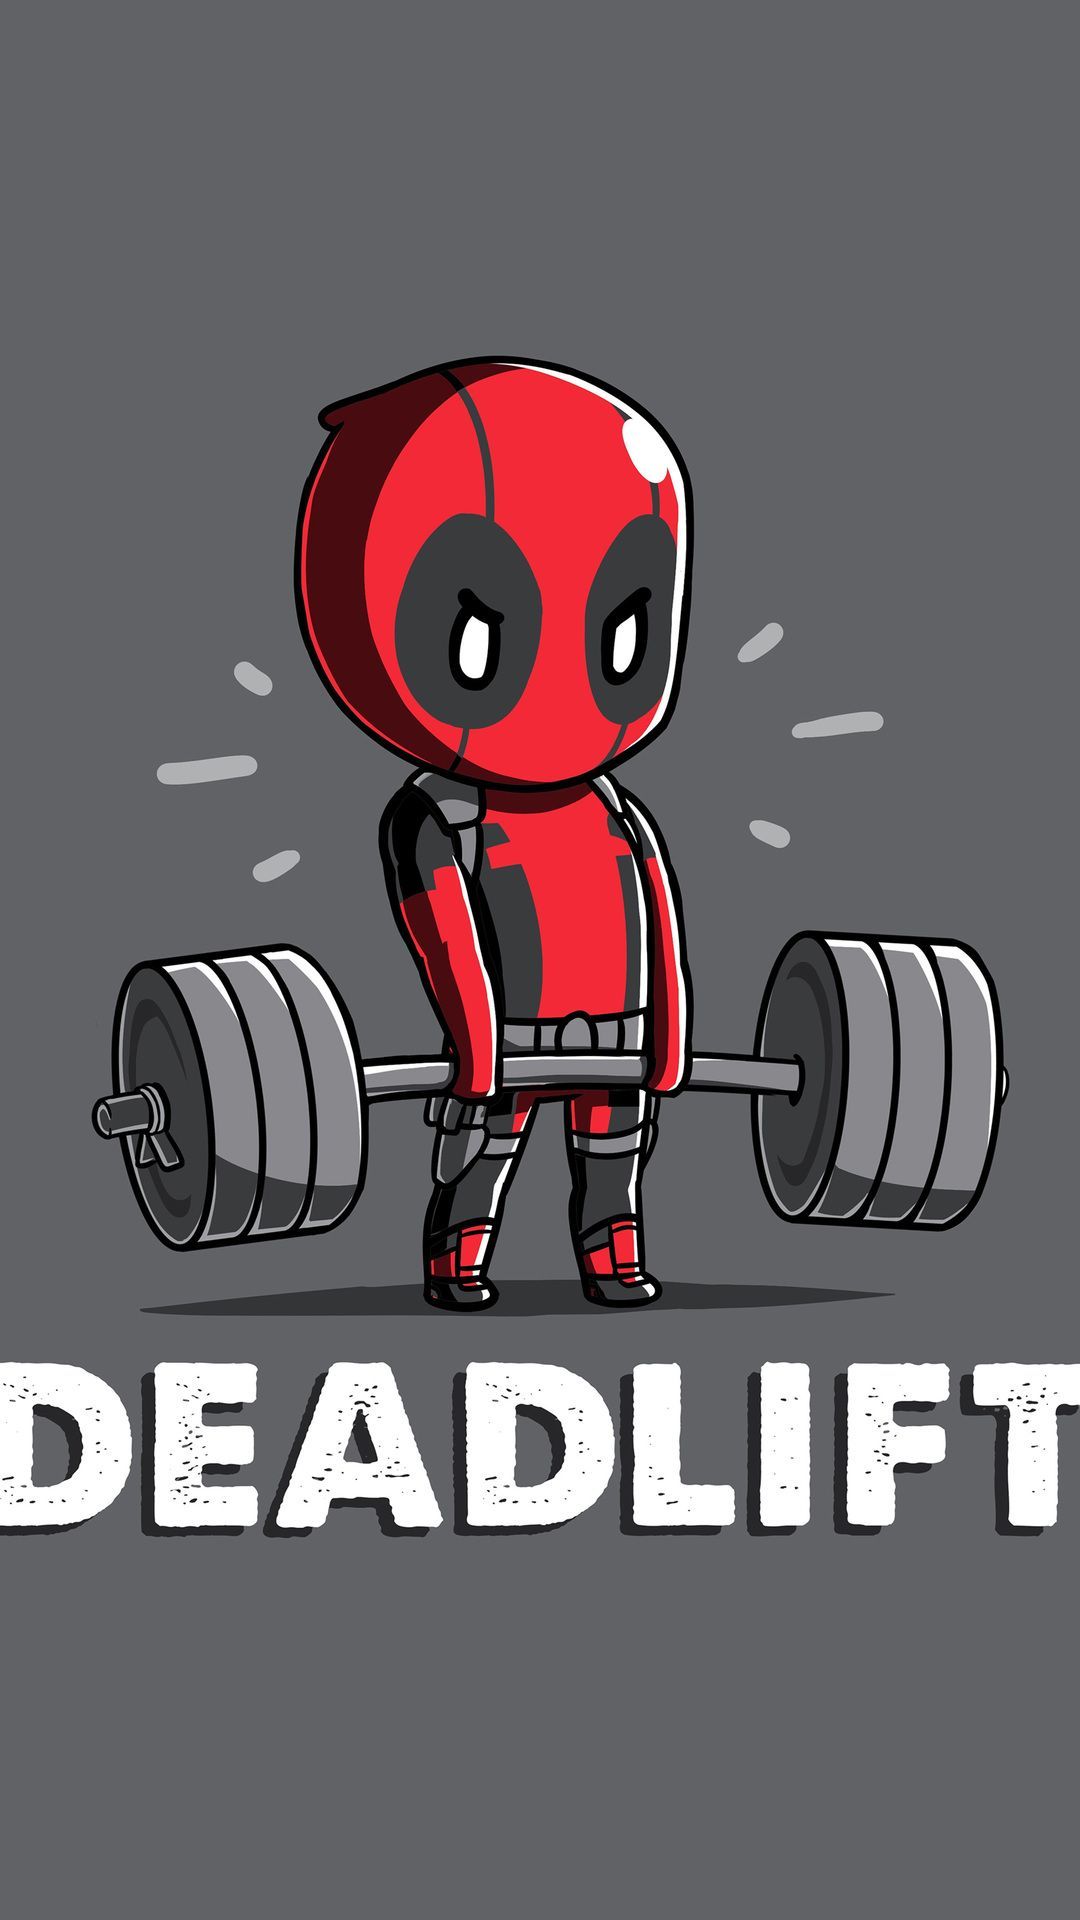 Funny iPhone Background Hupages Download iPhone Wallpaper. Deadpool cartoon, Deadpool art, Funny iphone background